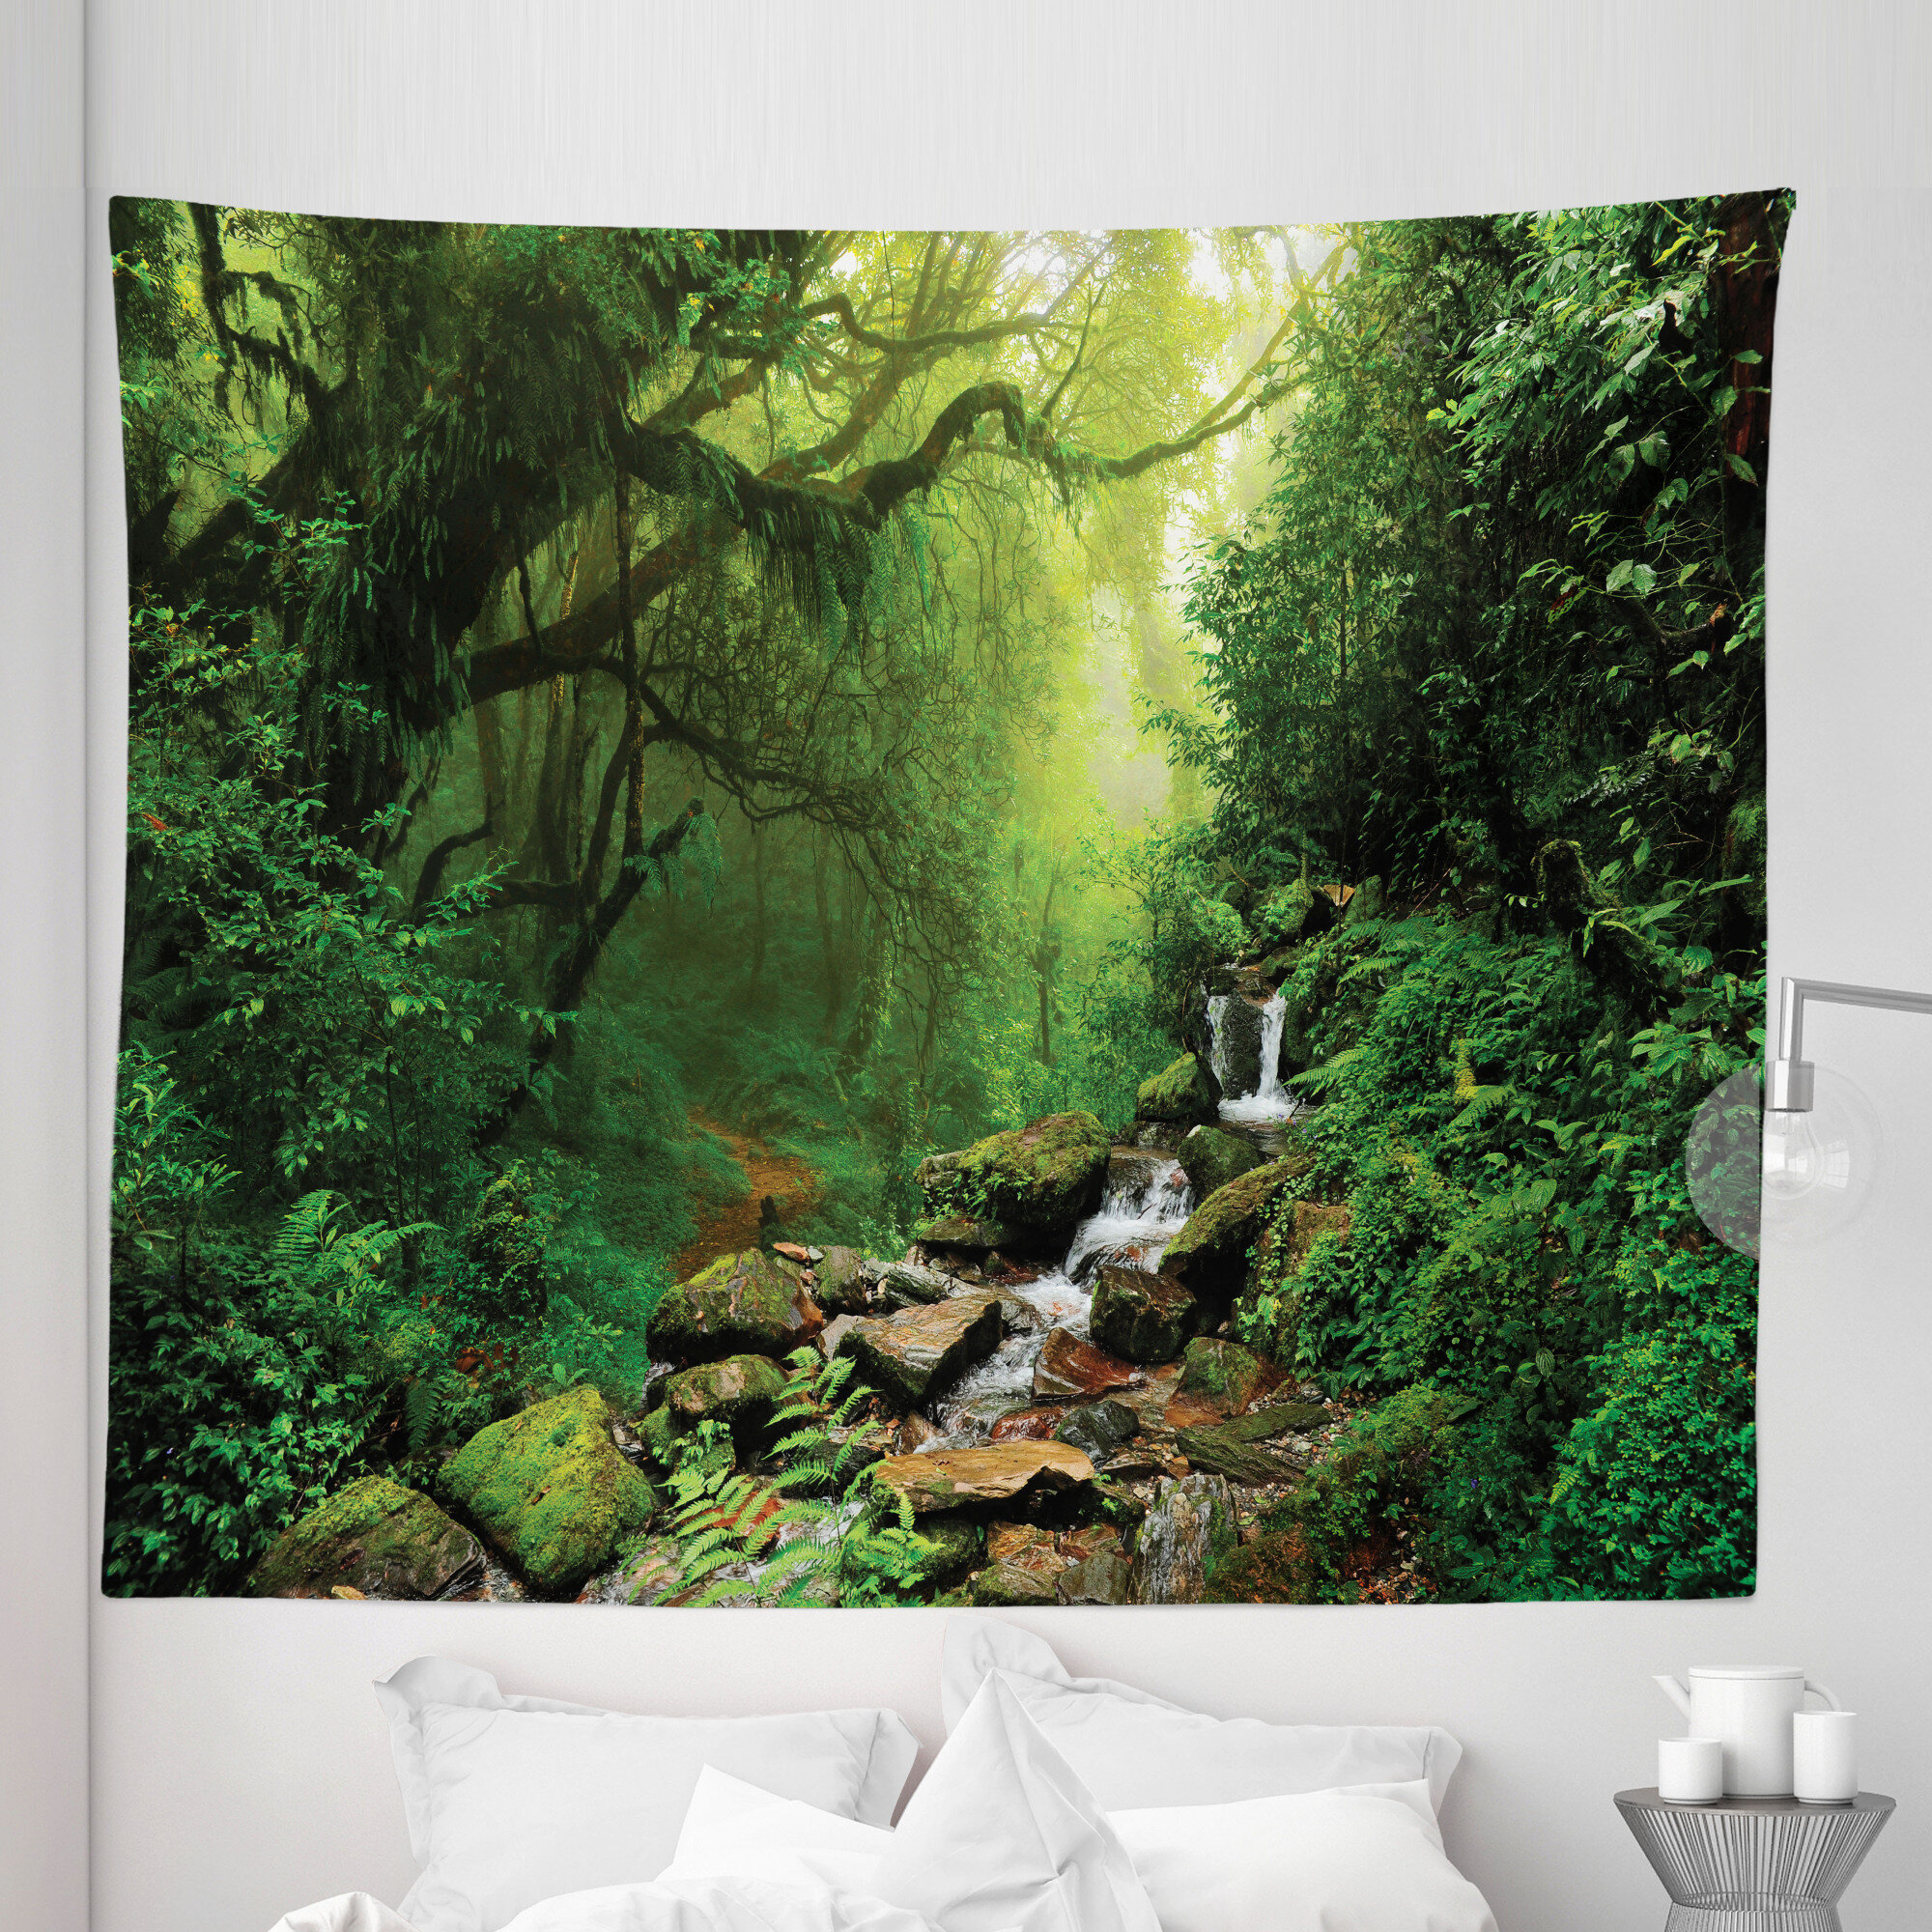 Large 3D Landscape Tapestry Wall Hanging Tapestry Bedspread Art Throw Home Decor 